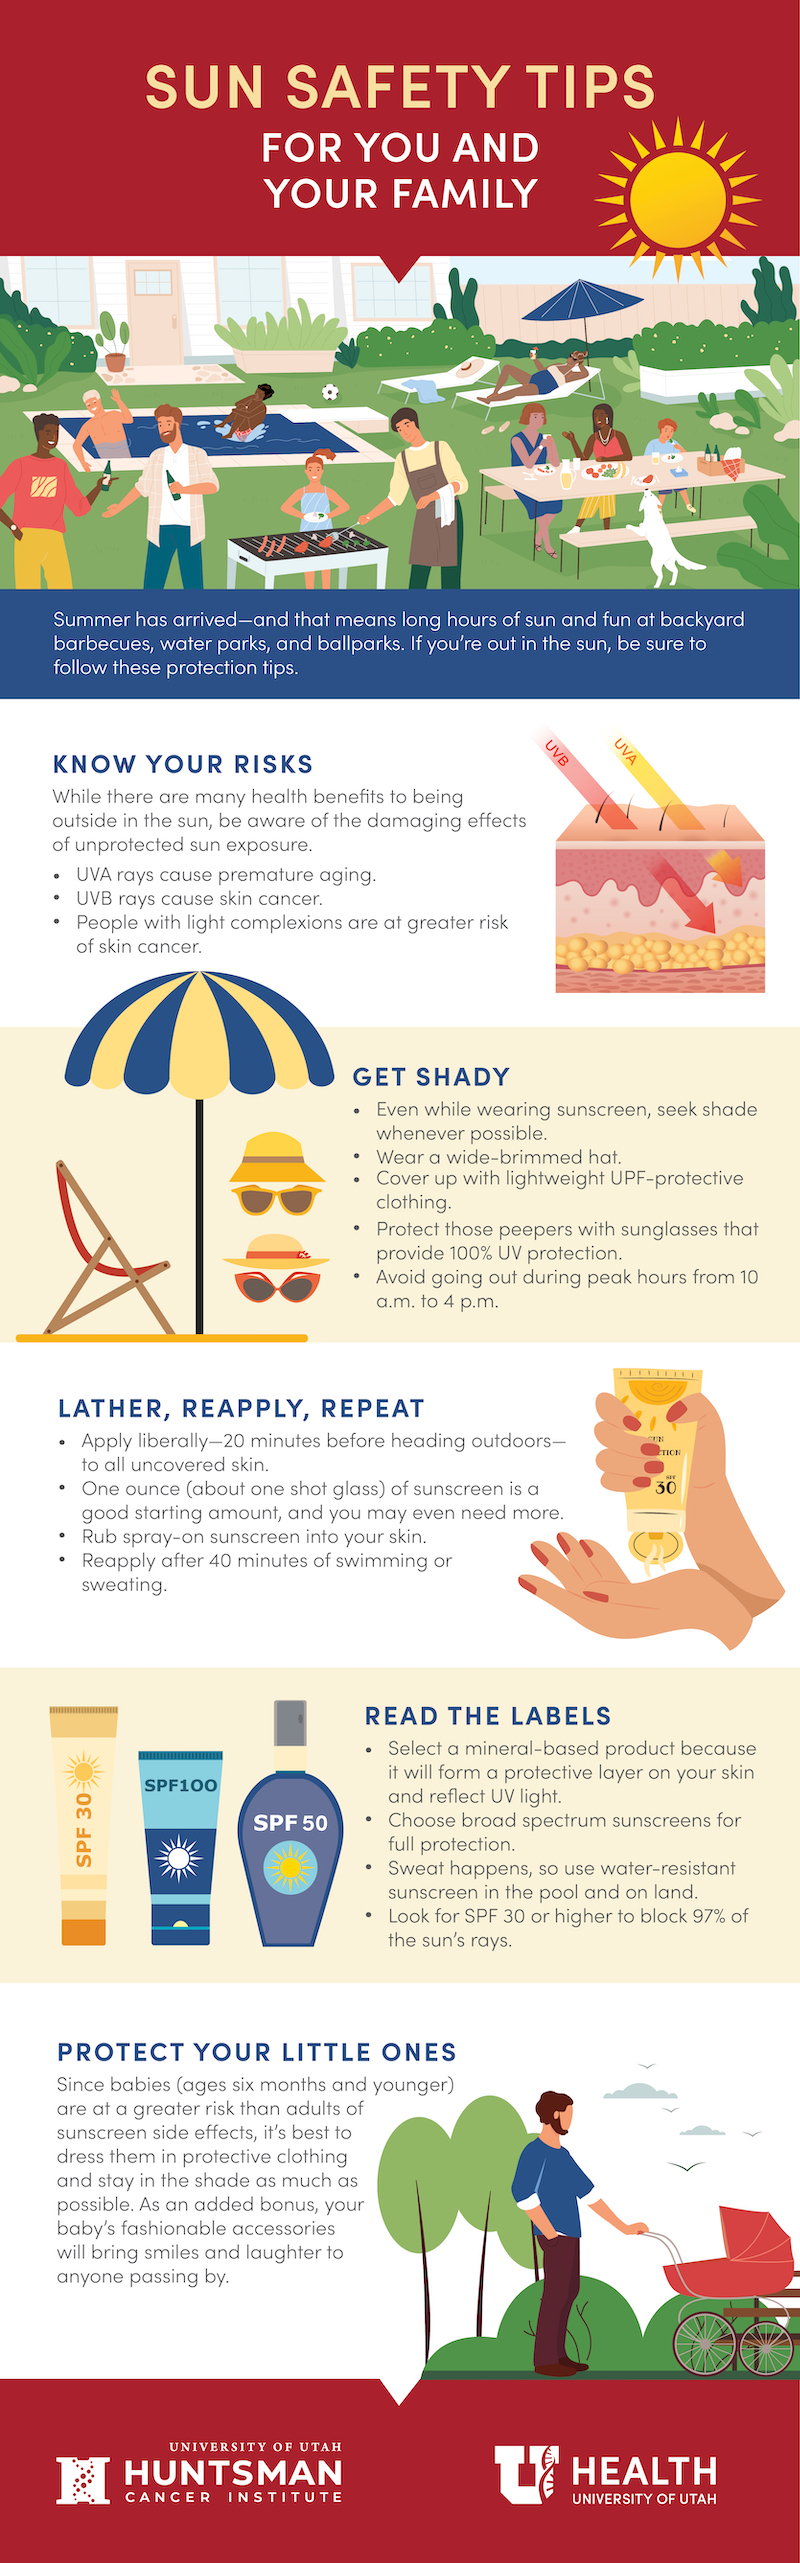 sun safety tips for you and family, know your risks, get shady, lather sunscreen and reapply, protect your little ones